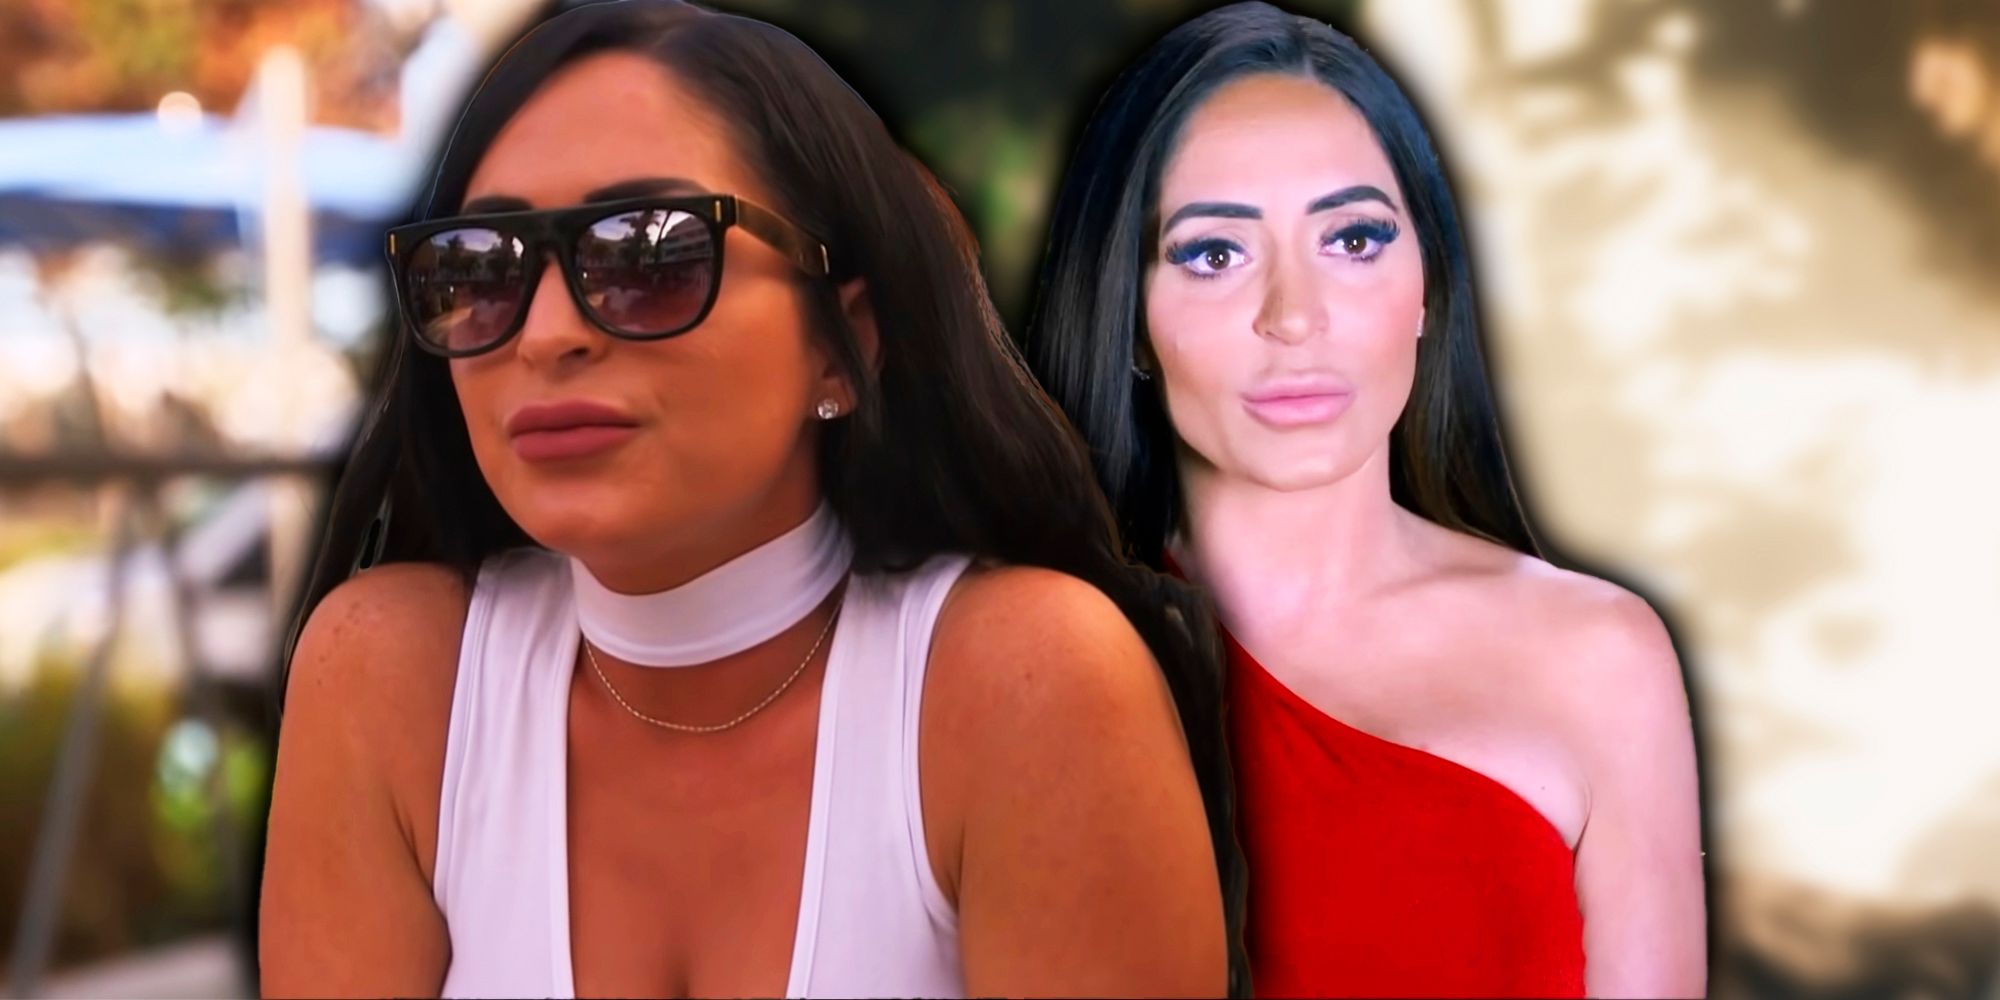 Angelina montage from Jersey shore